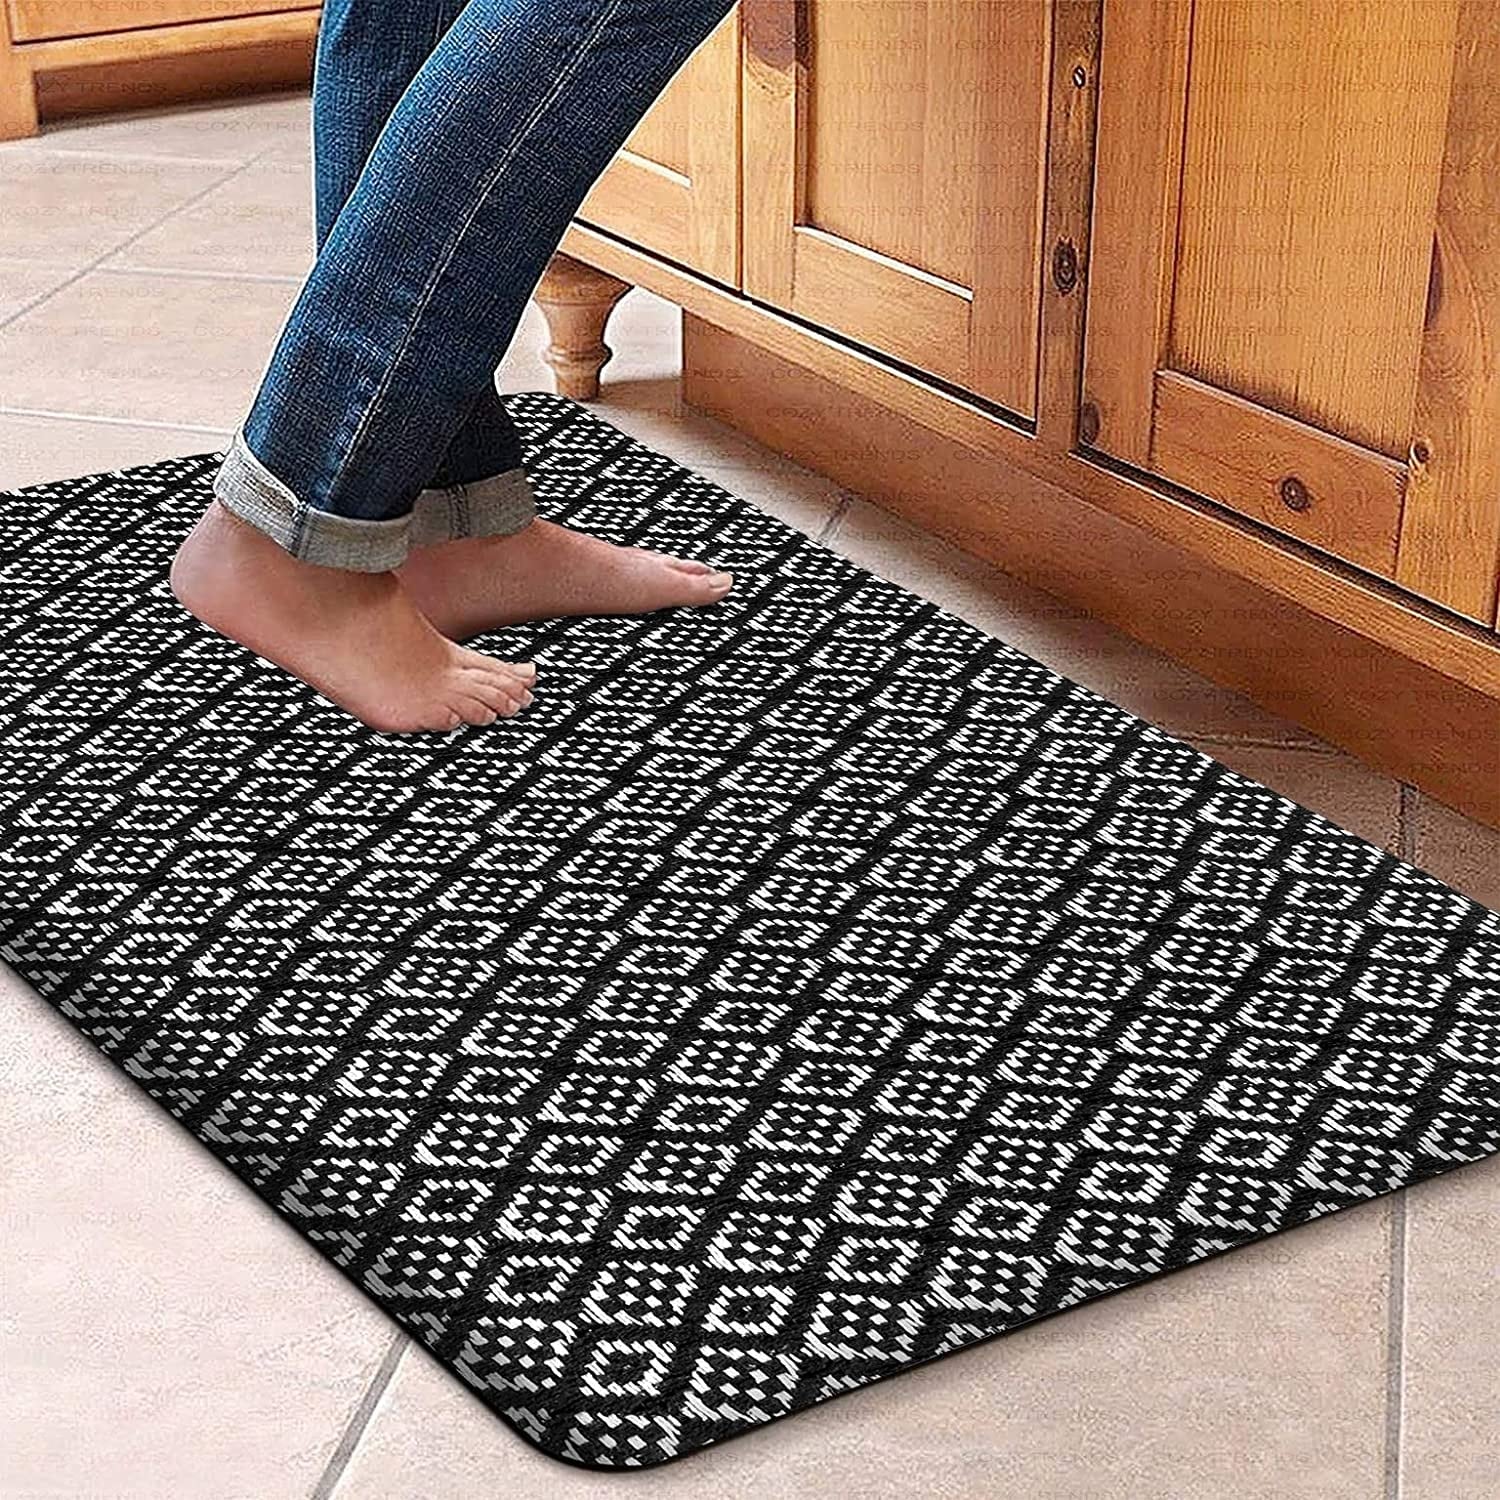 https://ak1.ostkcdn.com/images/products/is/images/direct/c9becd20e260ca202ff2fe37ec89eaa95341ce38/Cotton-Kitchen-Mat-Cushioned-Anti-Fatigue-Rug%2C-Non-Slip-Mats-Comfort-Foam-Rug-for-Kitchen%2C-Office%2C-Sink%2C-Laundry---18%27%27x30%27%27.jpg